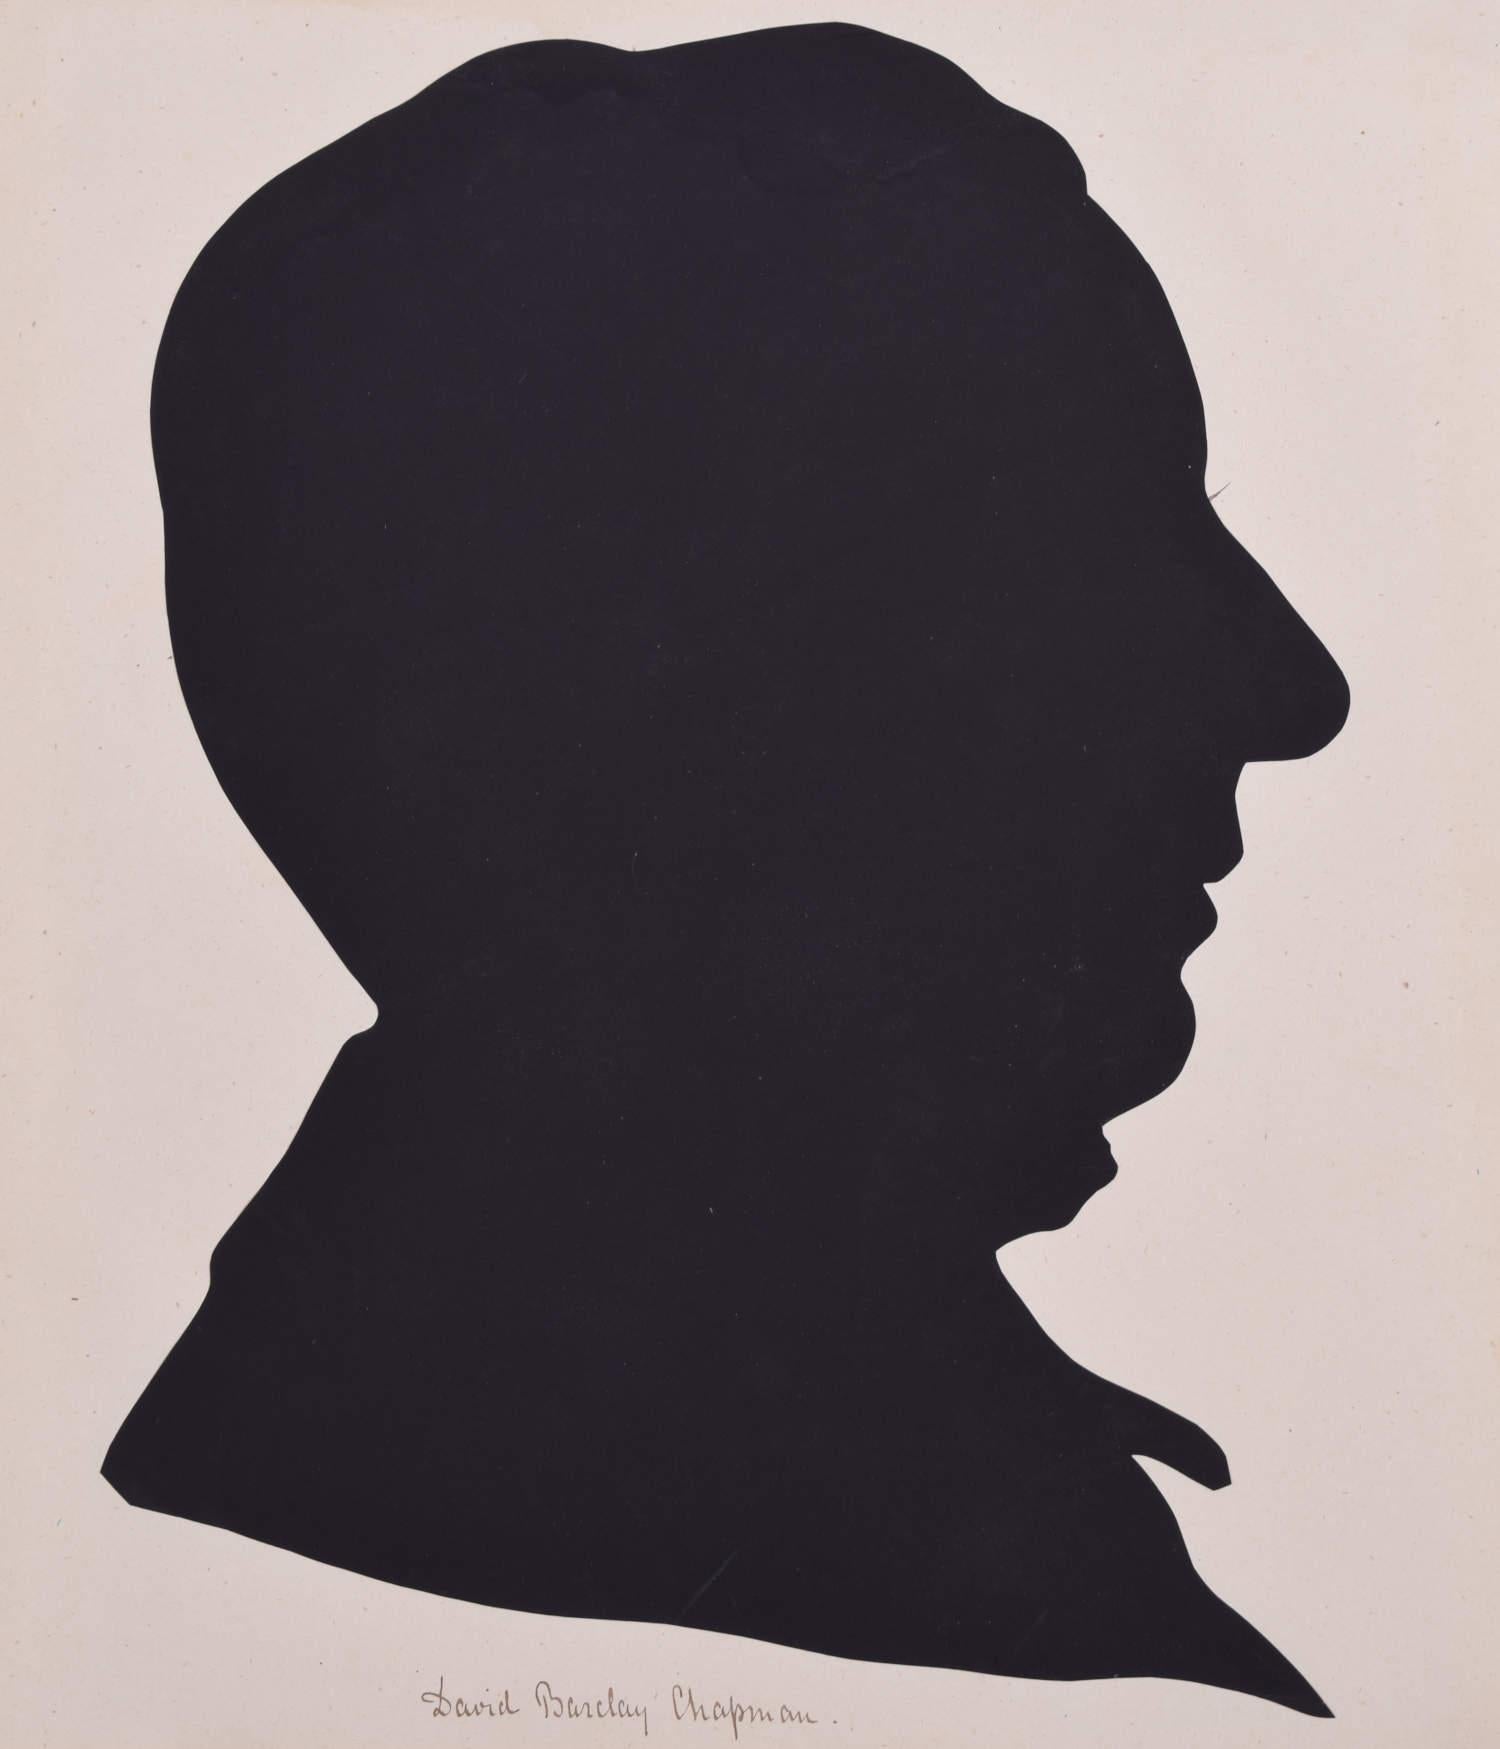 Unknown Black and White Photograph - Nineteenth century silhouette of a gentleman: David Barclay Chapman